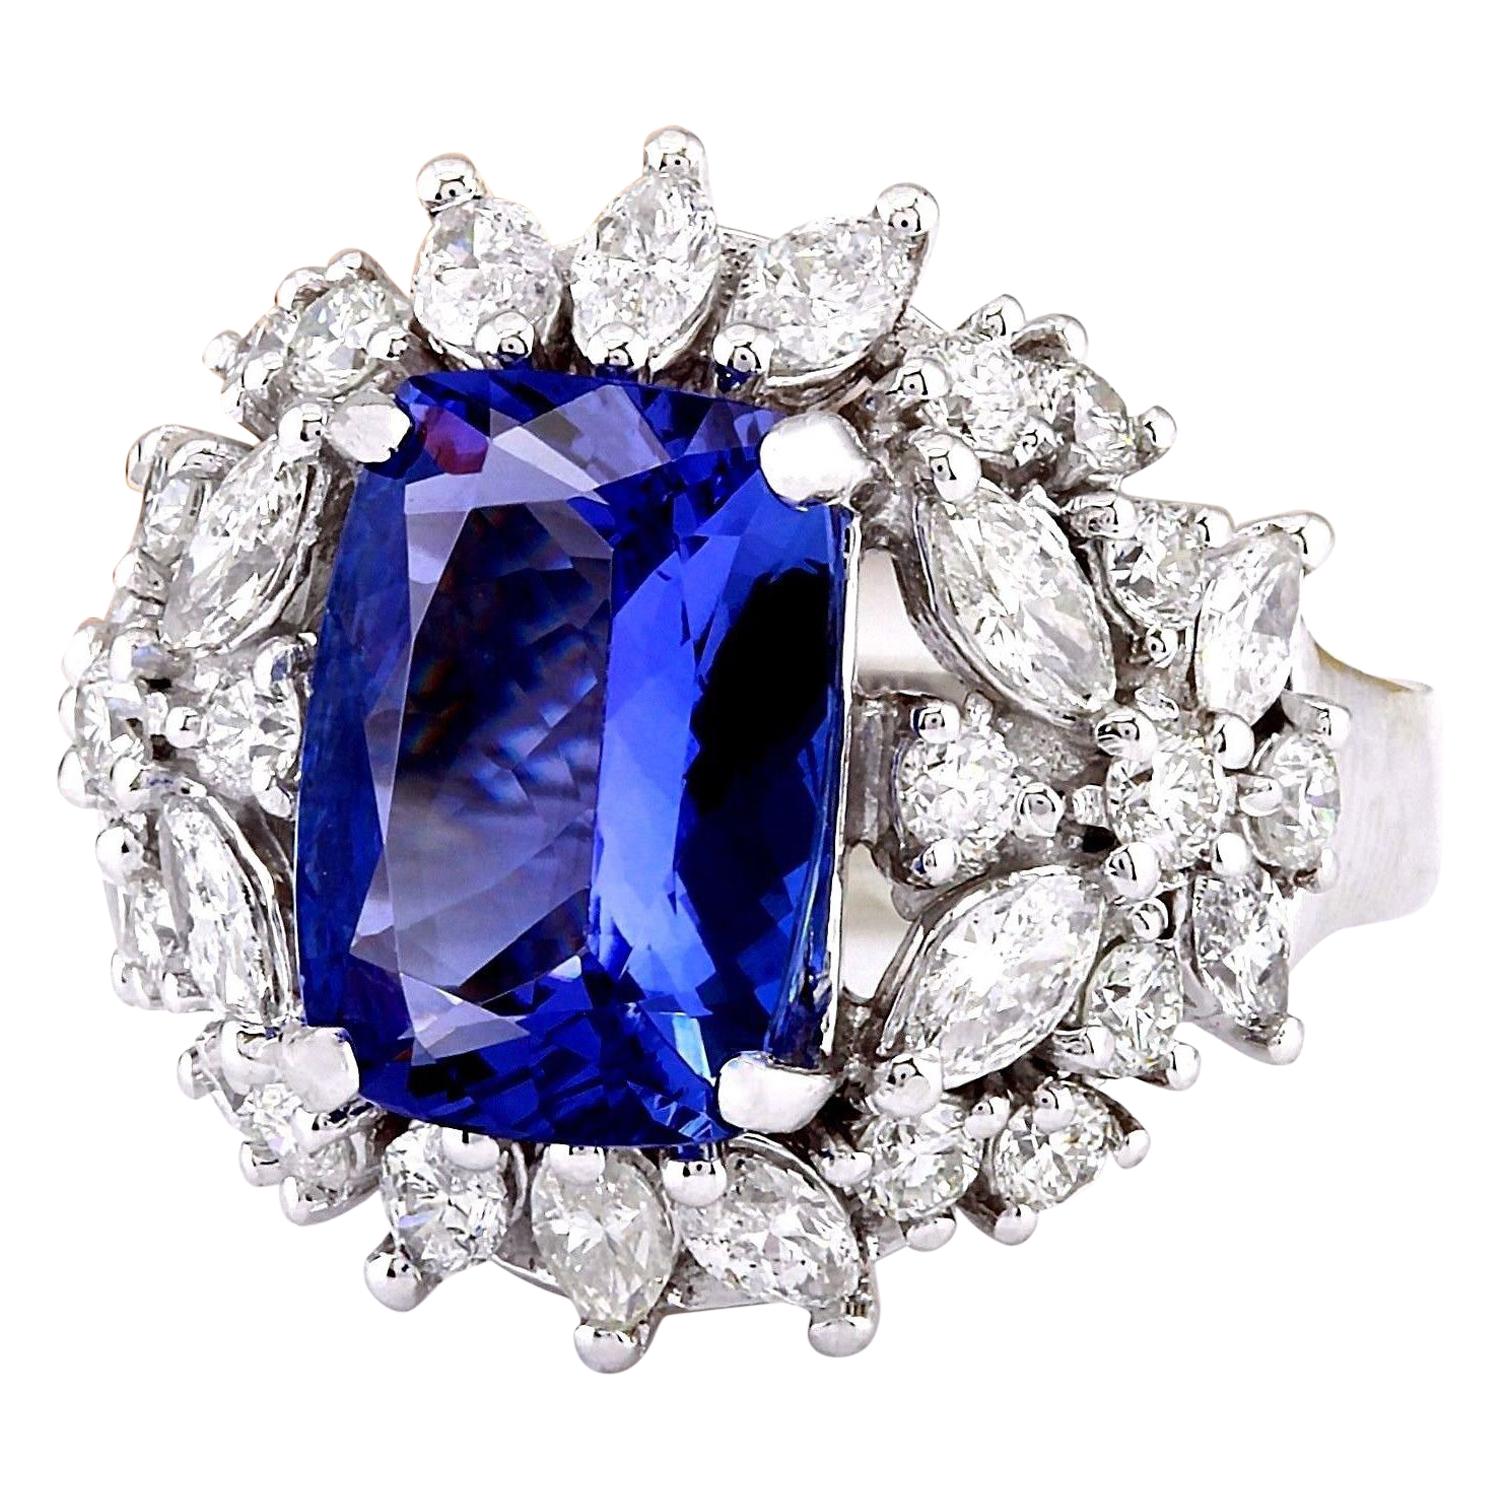 Introducing our captivating 5.35 Carat Tanzanite 14K Solid White Gold Diamond Ring. Crafted from luxurious 14K White Gold, this ring boasts a total metal weight of 6.7 grams, ensuring quality and durability. The centerpiece is a mesmerizing